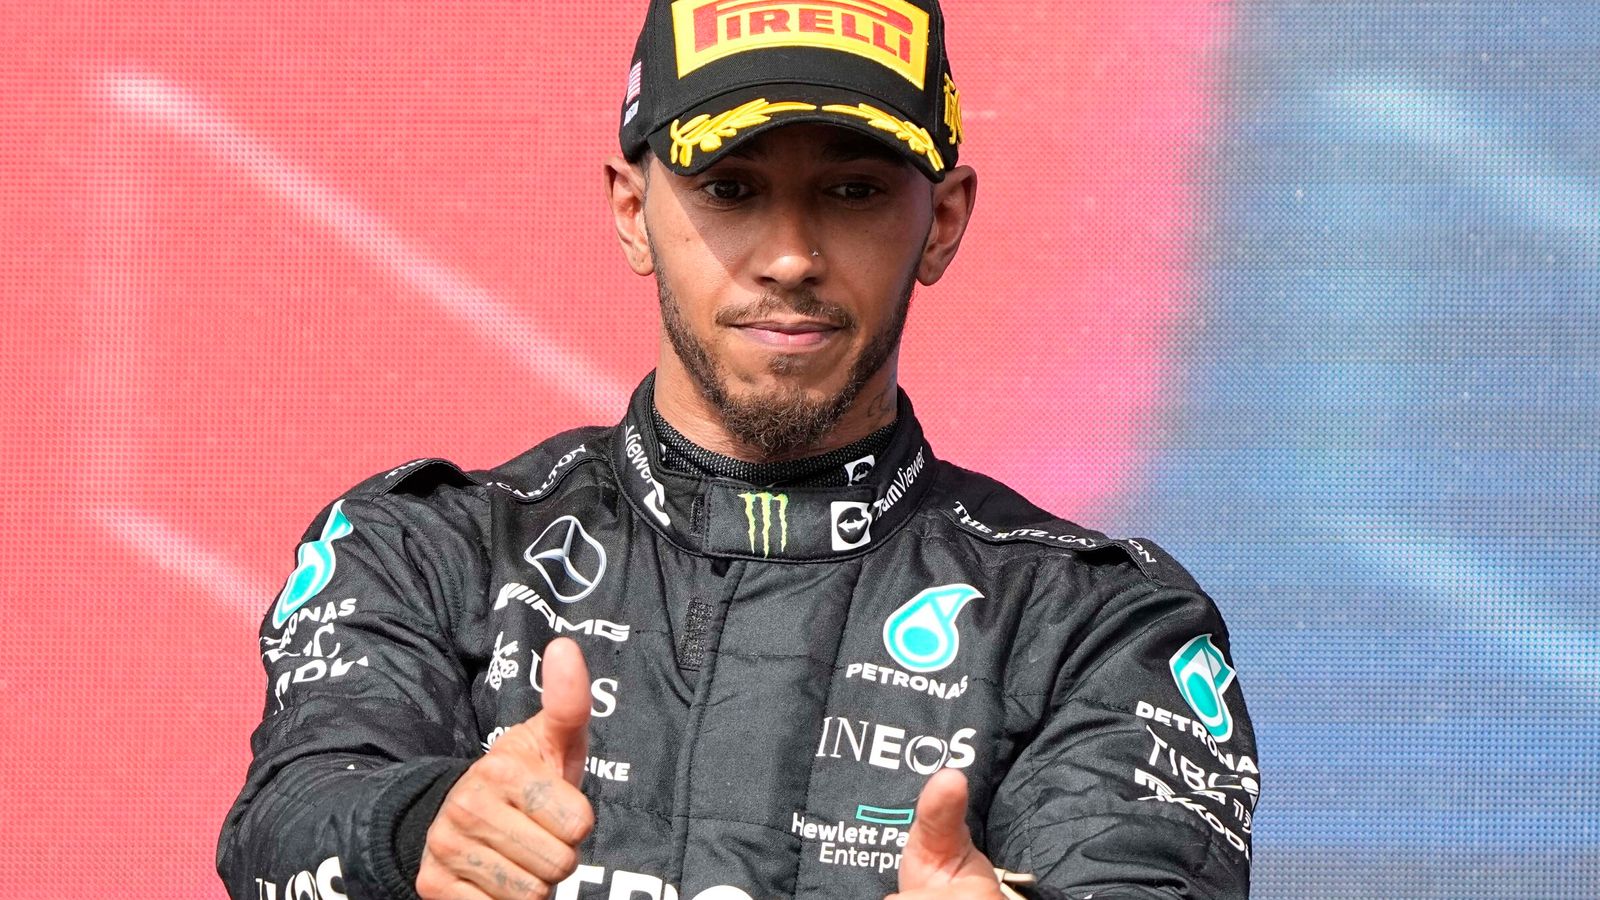 Lewis Hamilton Defiant After Agonising Us Gp Blow And Says He Can Take